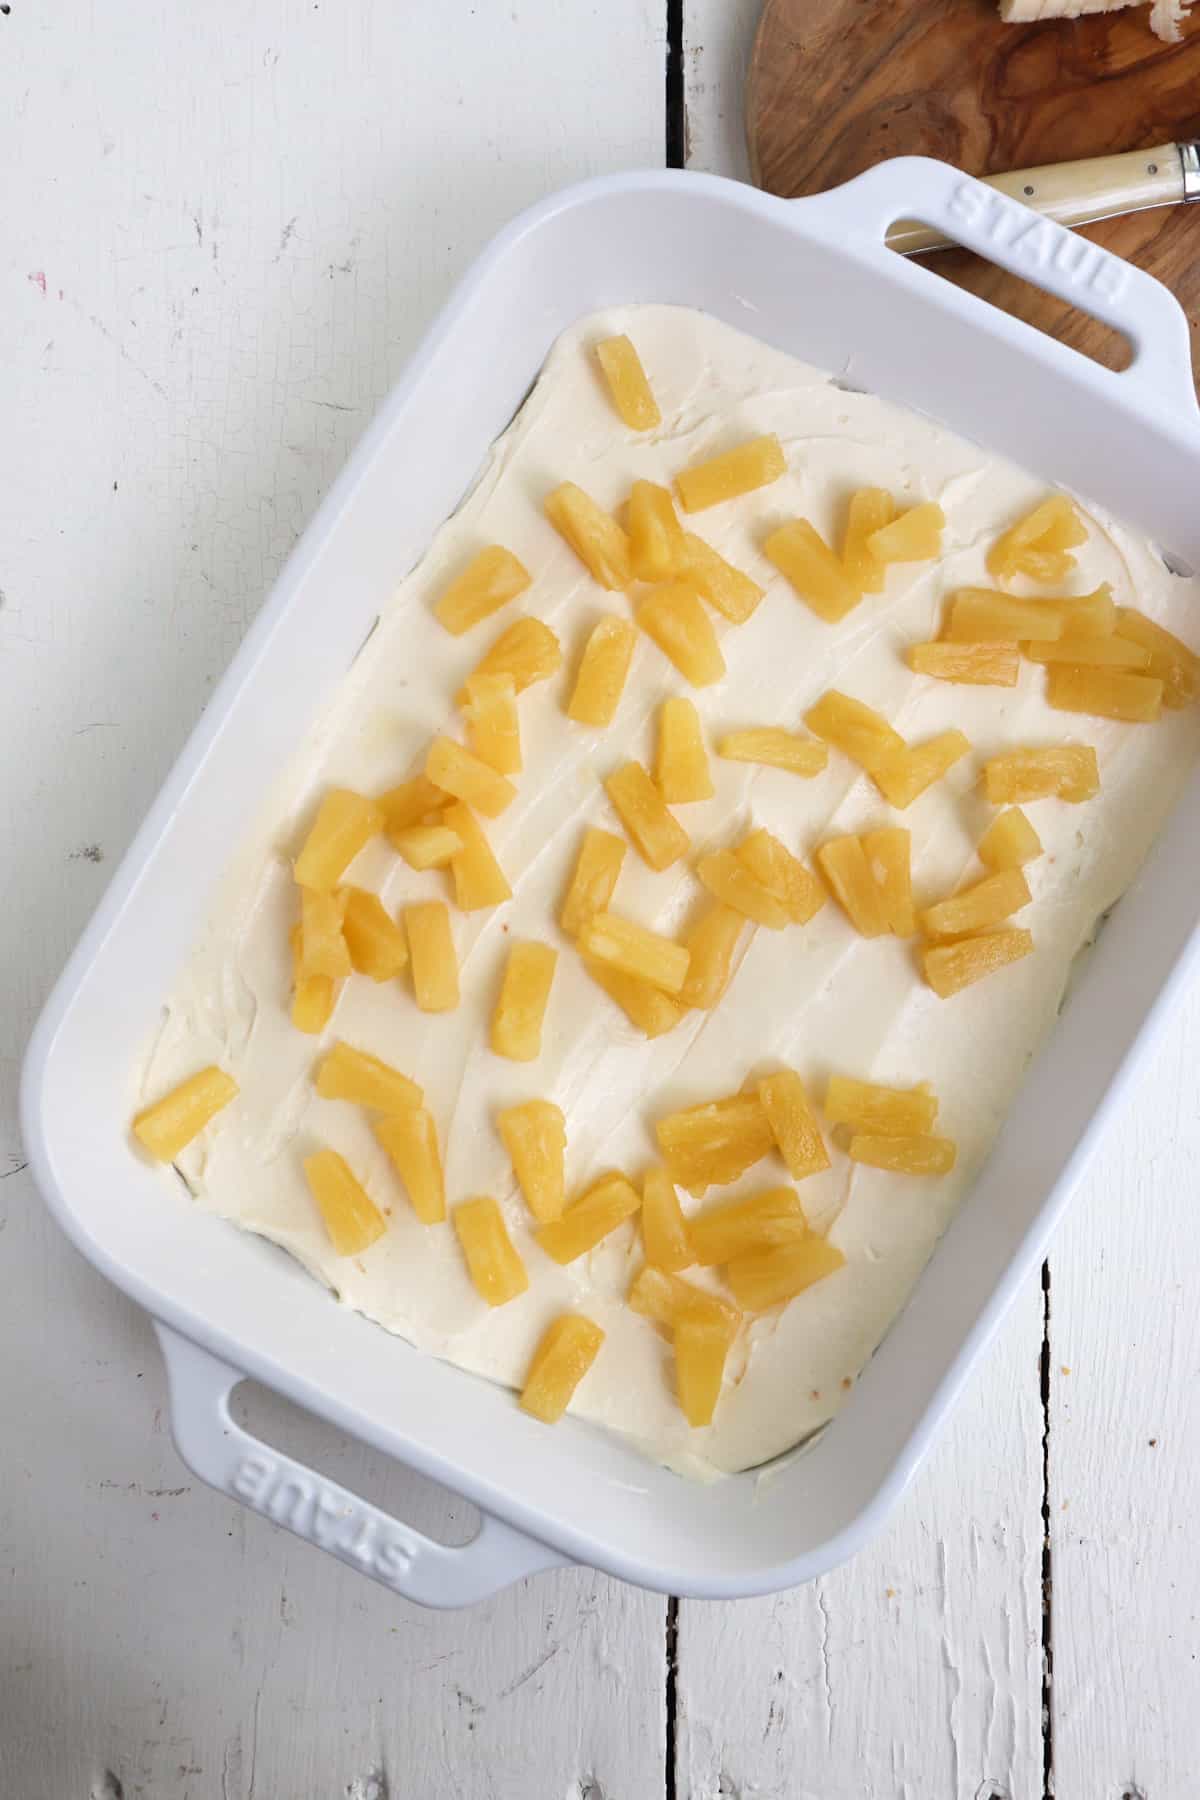 pineapple layer in dish.